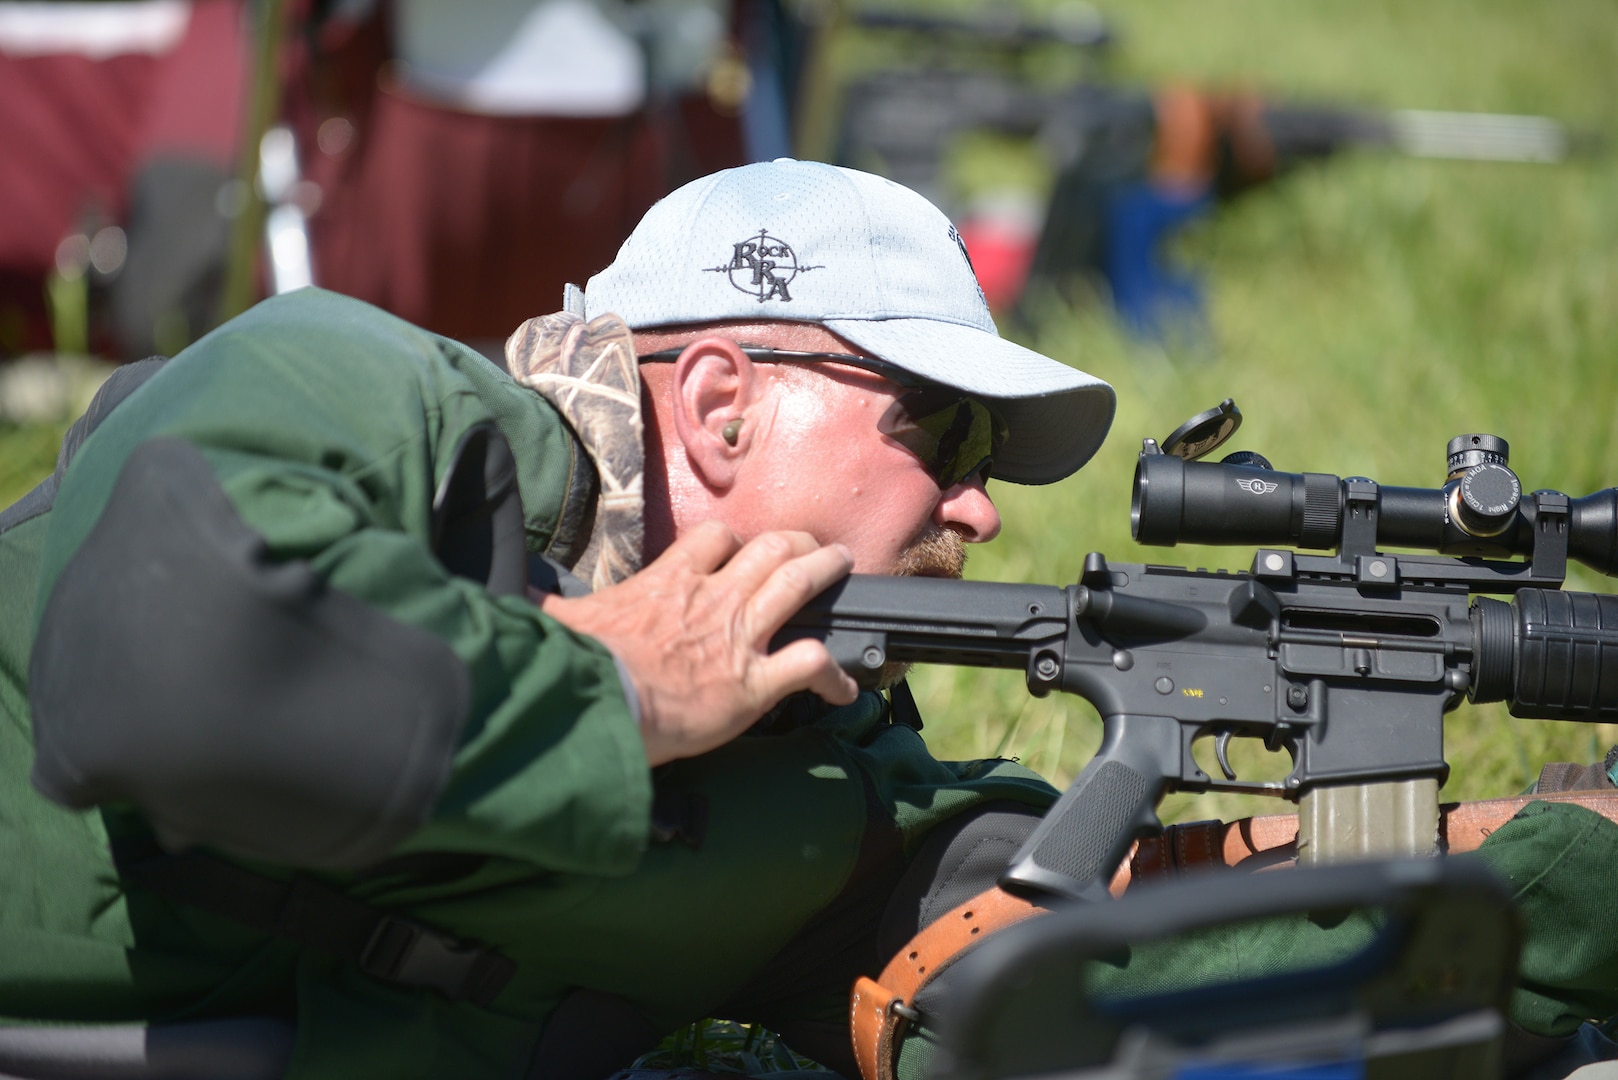 Rodney Abbott adjusts the stock of his riffle into his shoulder during the 2018 Eastern Civilian Marksmanship Program Games and Matches, hosted by North Carolina National Guard's Camp Butner Training Center, in Stem, North Carolina, May 1, 2018. Camp Butner has been home to the Eastern Games for 12 years with 1,800 competitor entries for the 2018 competition.